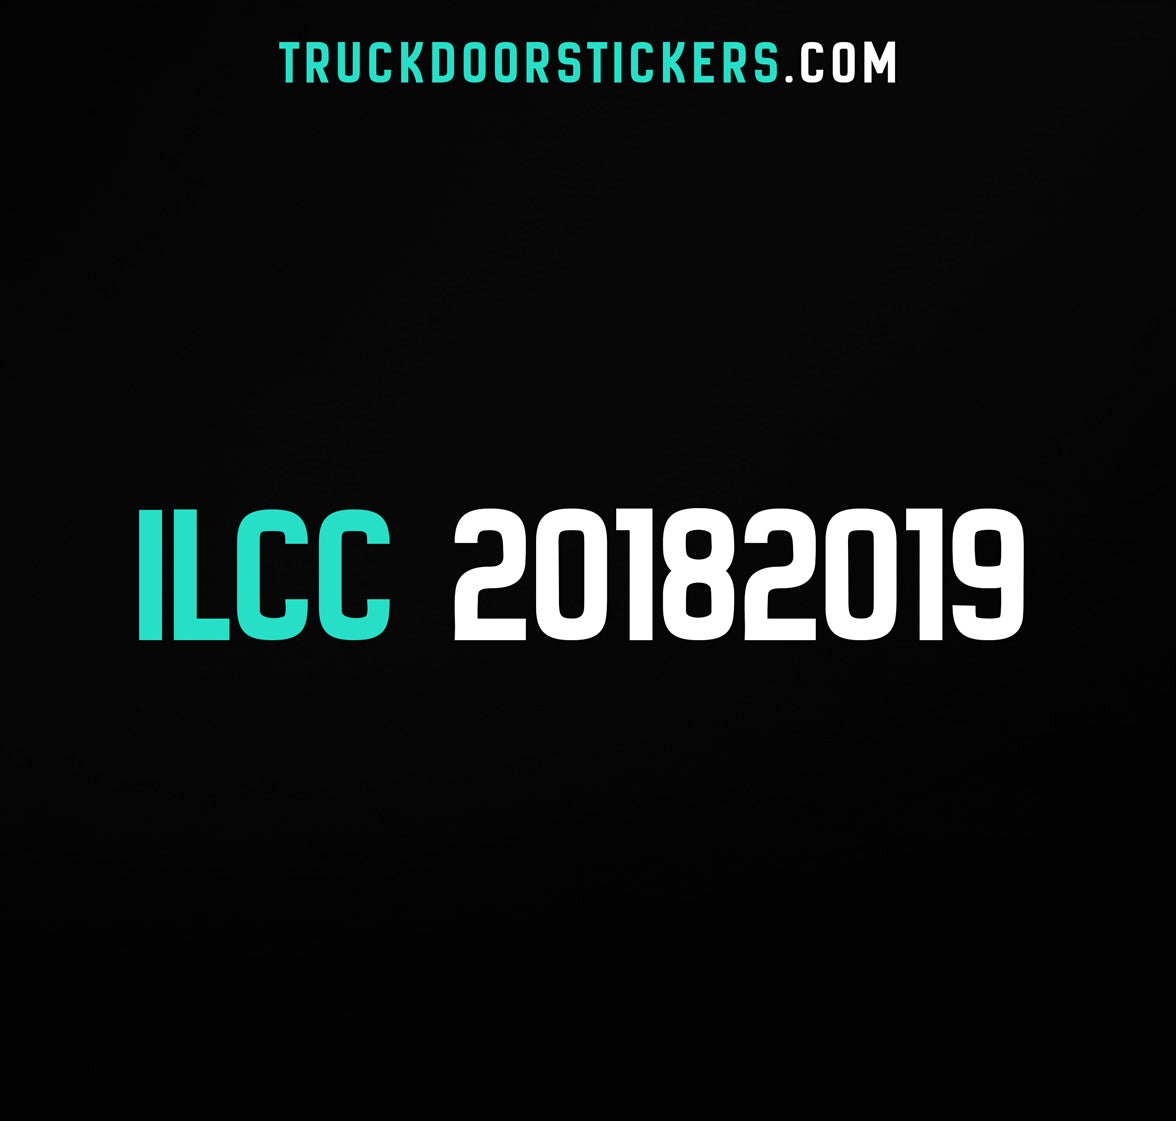 ilcc number decal